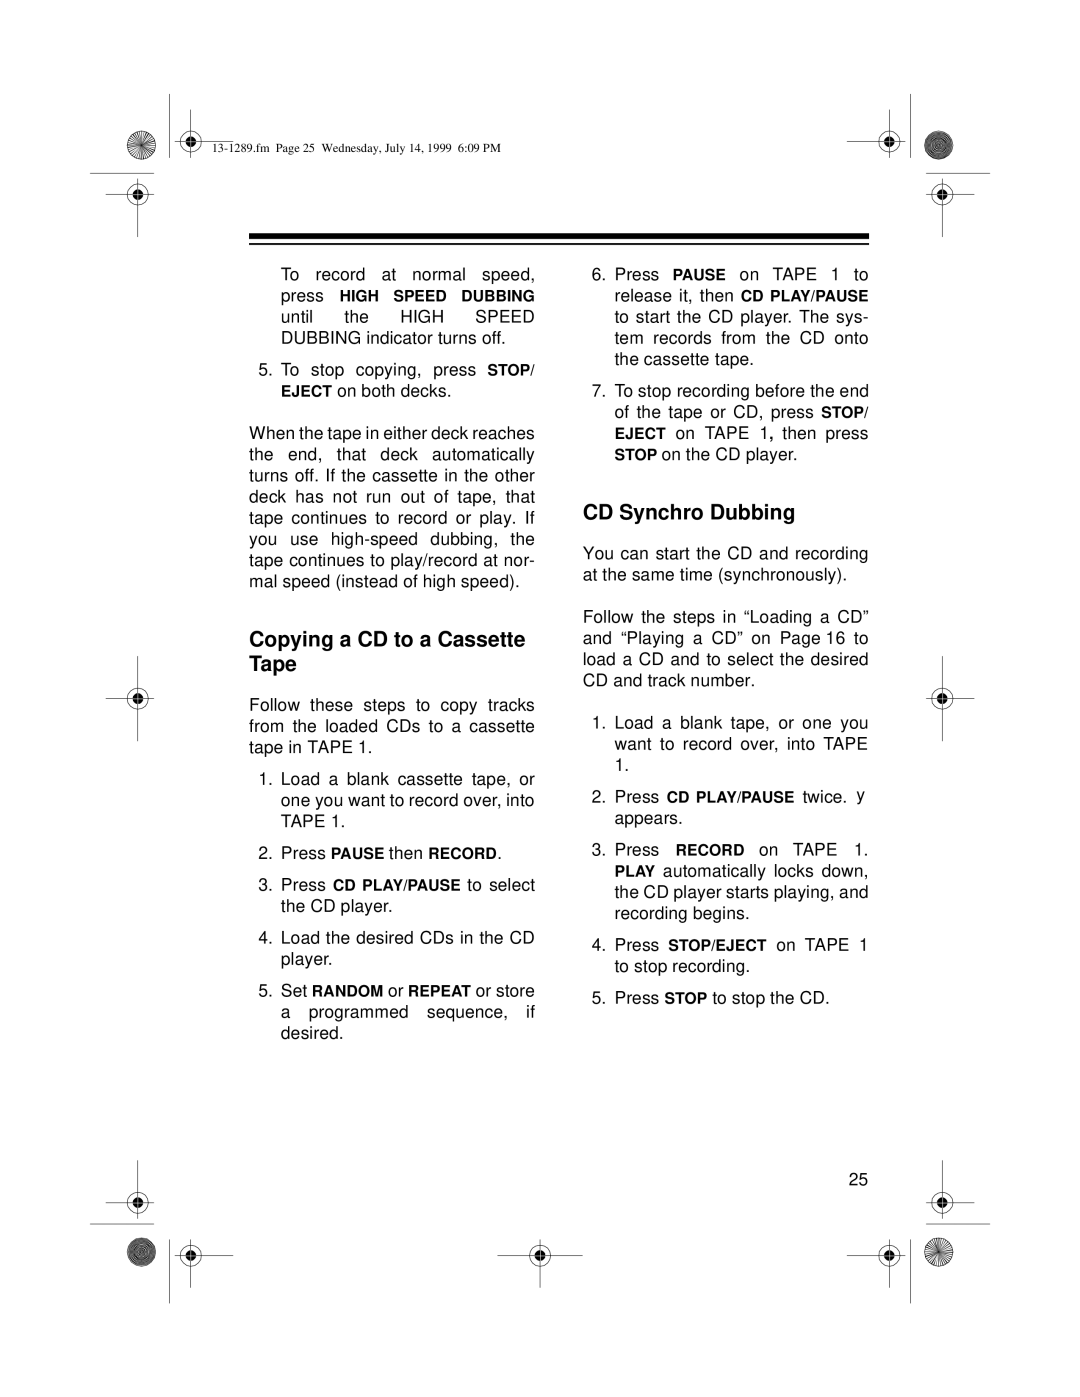 Optimus 742 owner manual Copying a CD to a Cassette Tape, CD Synchro Dubbing 